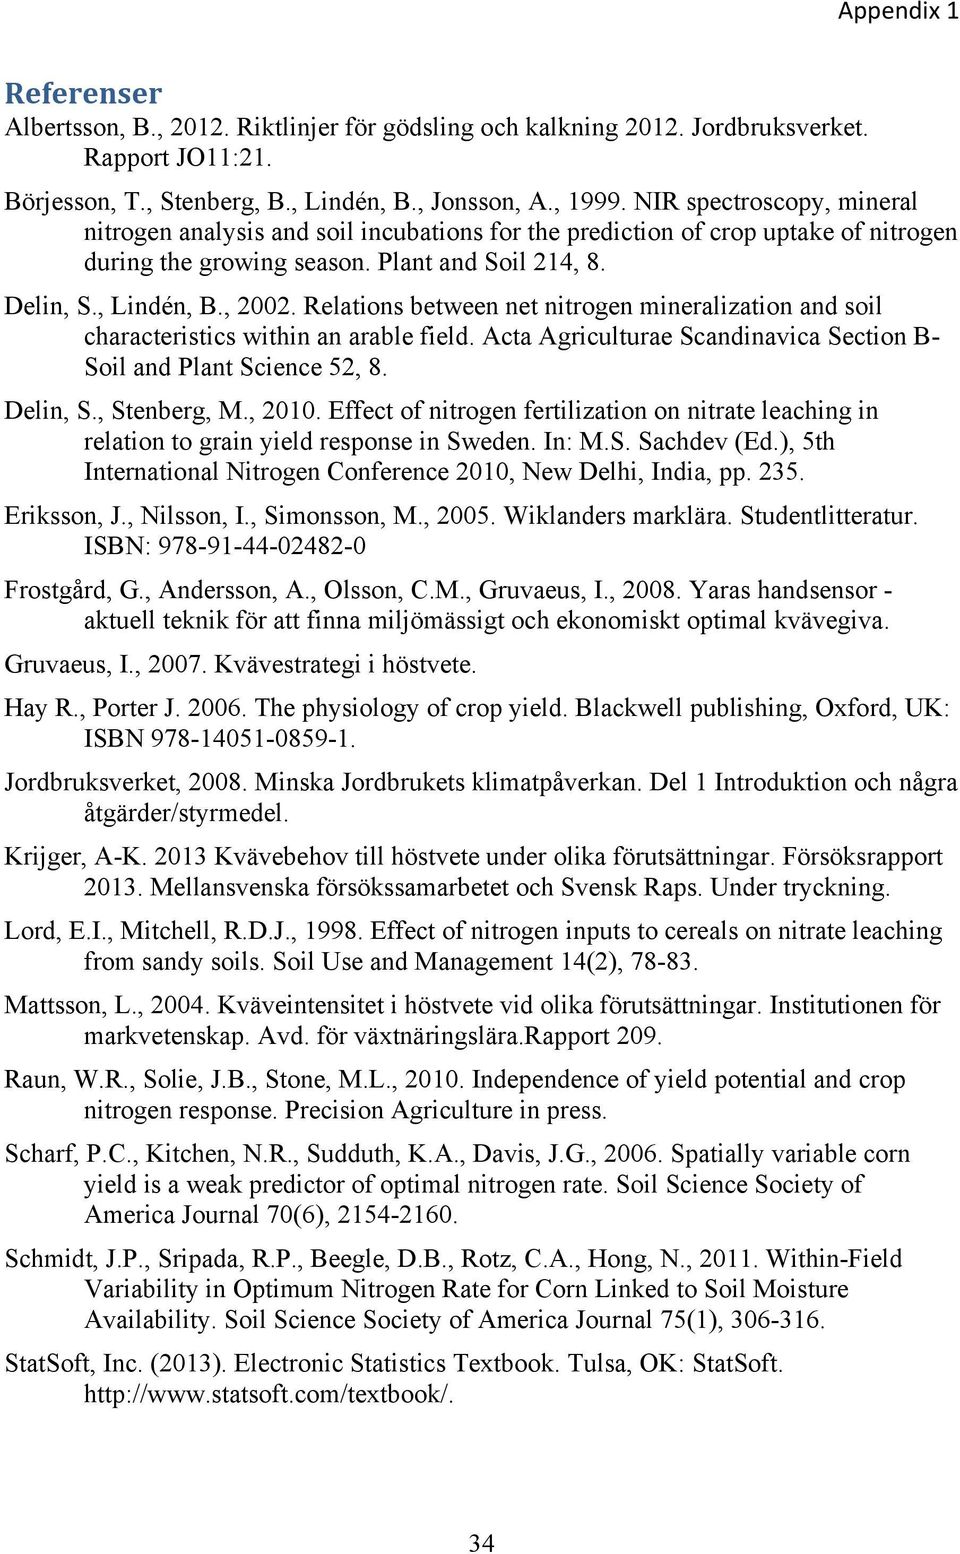 Relations between net nitrogen mineralization and soil characteristics within an arable field. Acta Agriculturae Scandinavica Section B- Soil and Plant Science 52, 8. Delin, S., Stenberg, M., 2010.